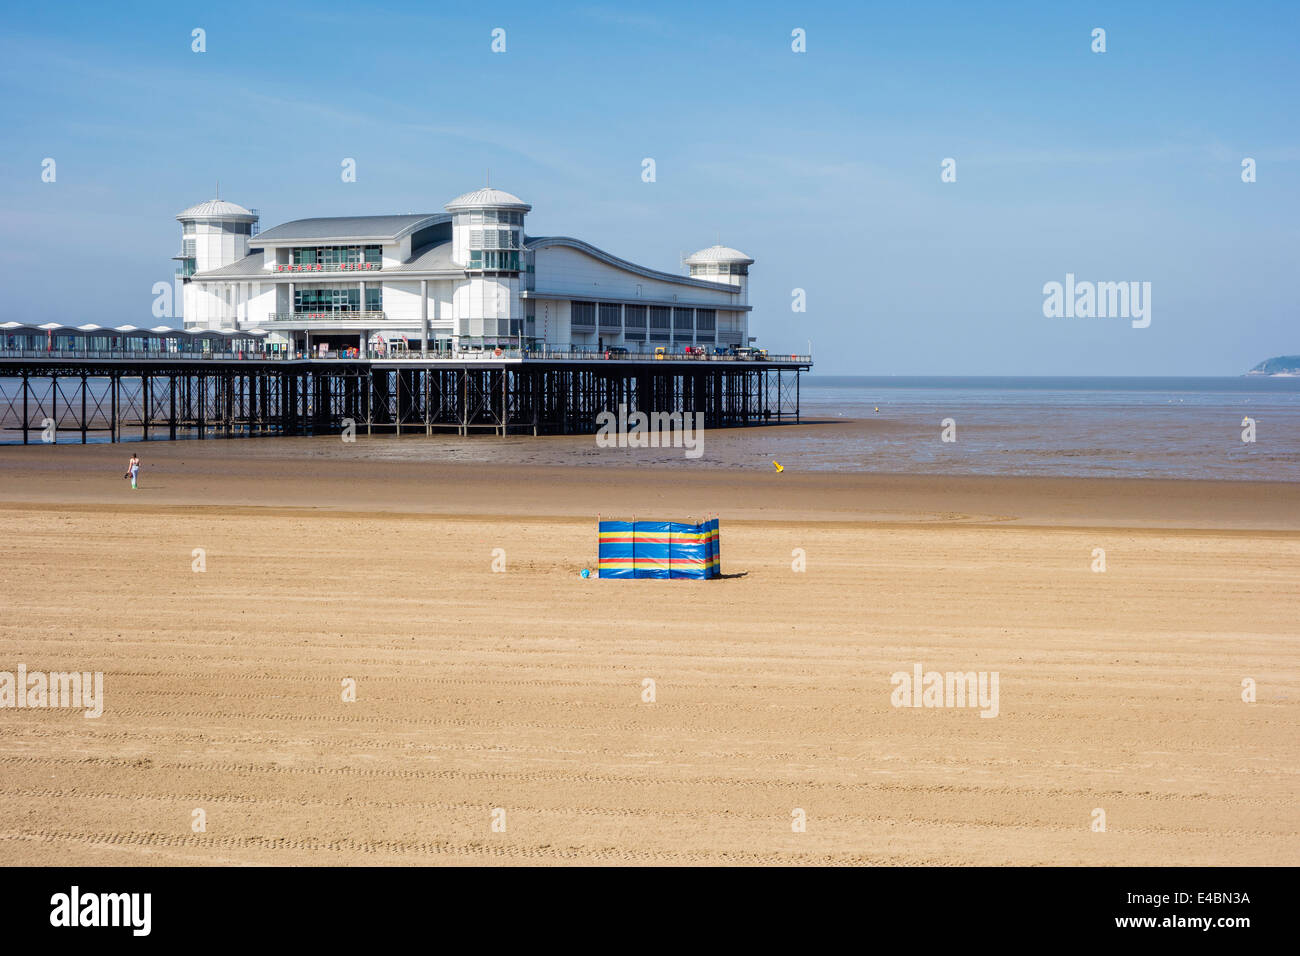 Windbreak and one person on the Beach at Weston-super-Mare, Somerset, UK Stock Photo